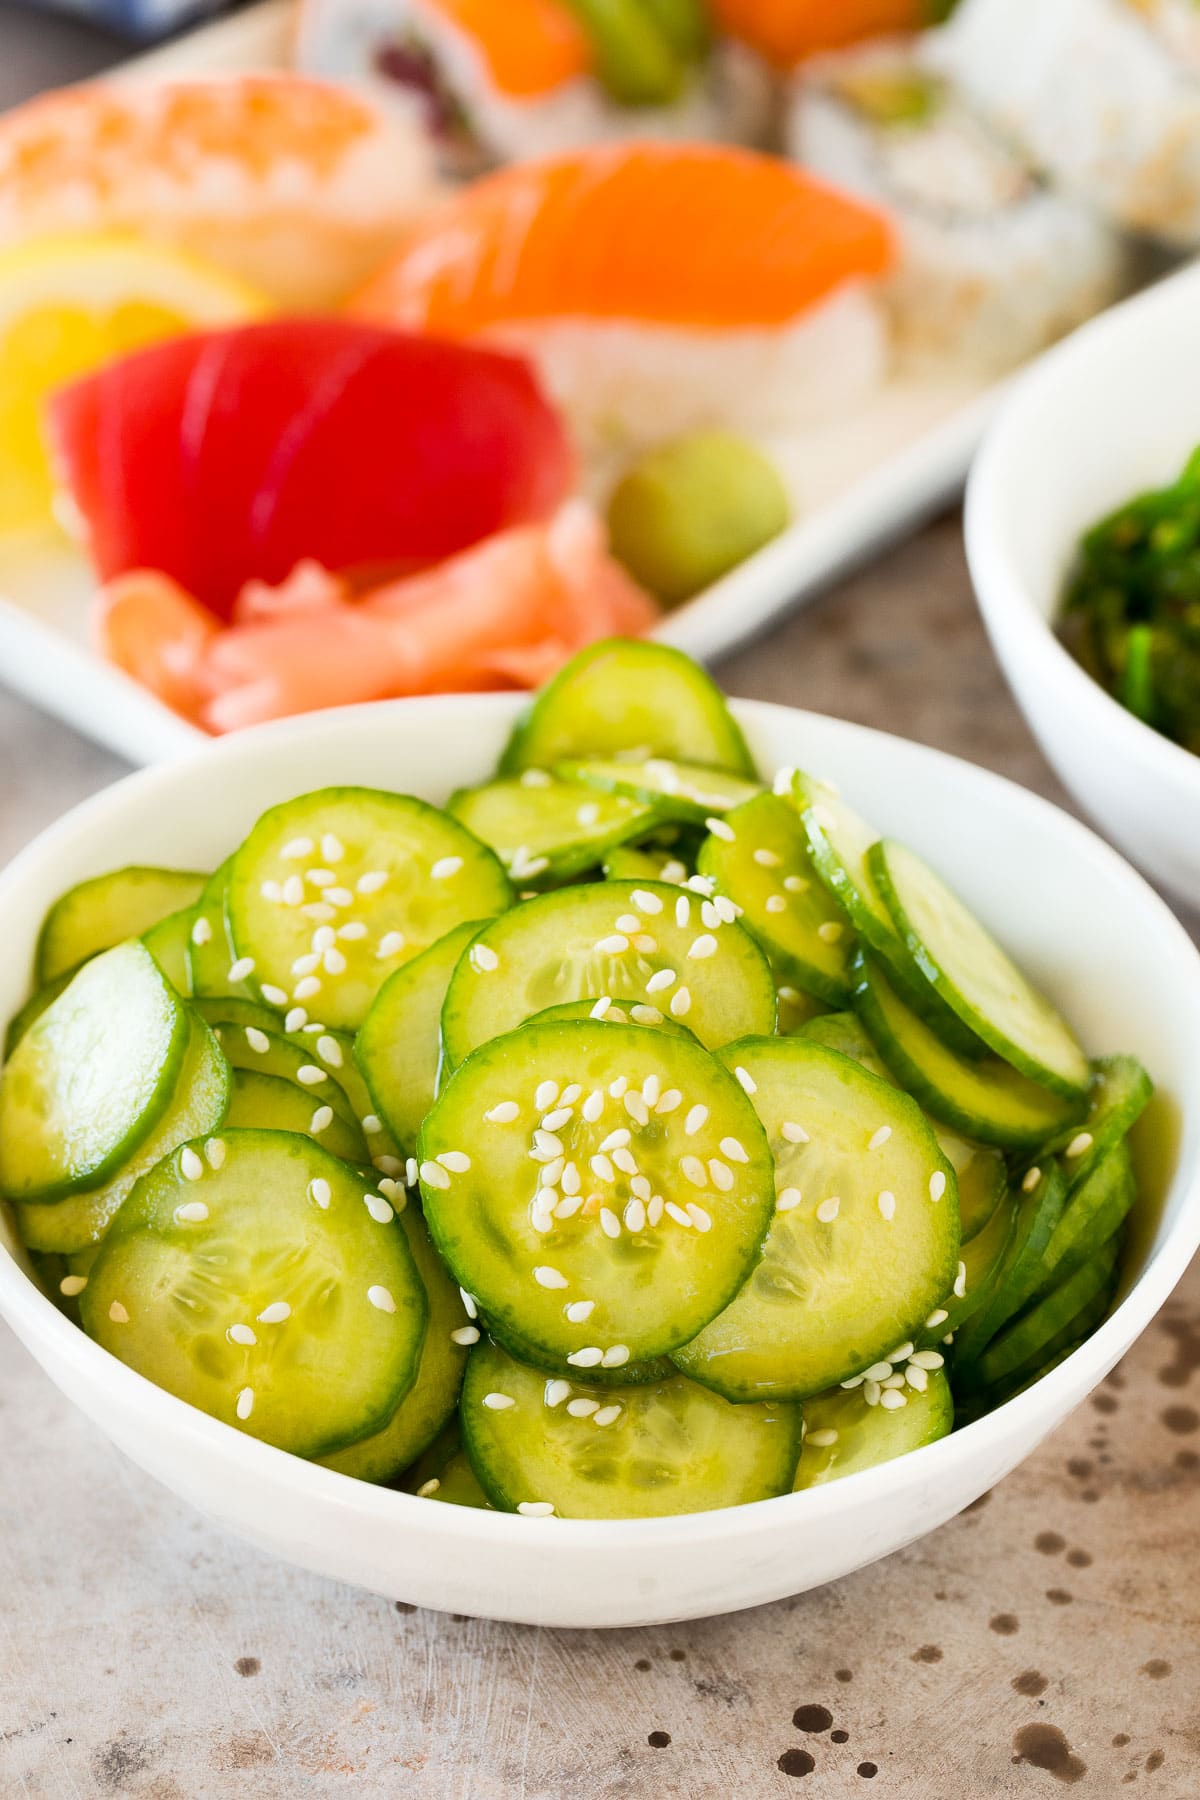 A bowl of Japanese cucumber salad.